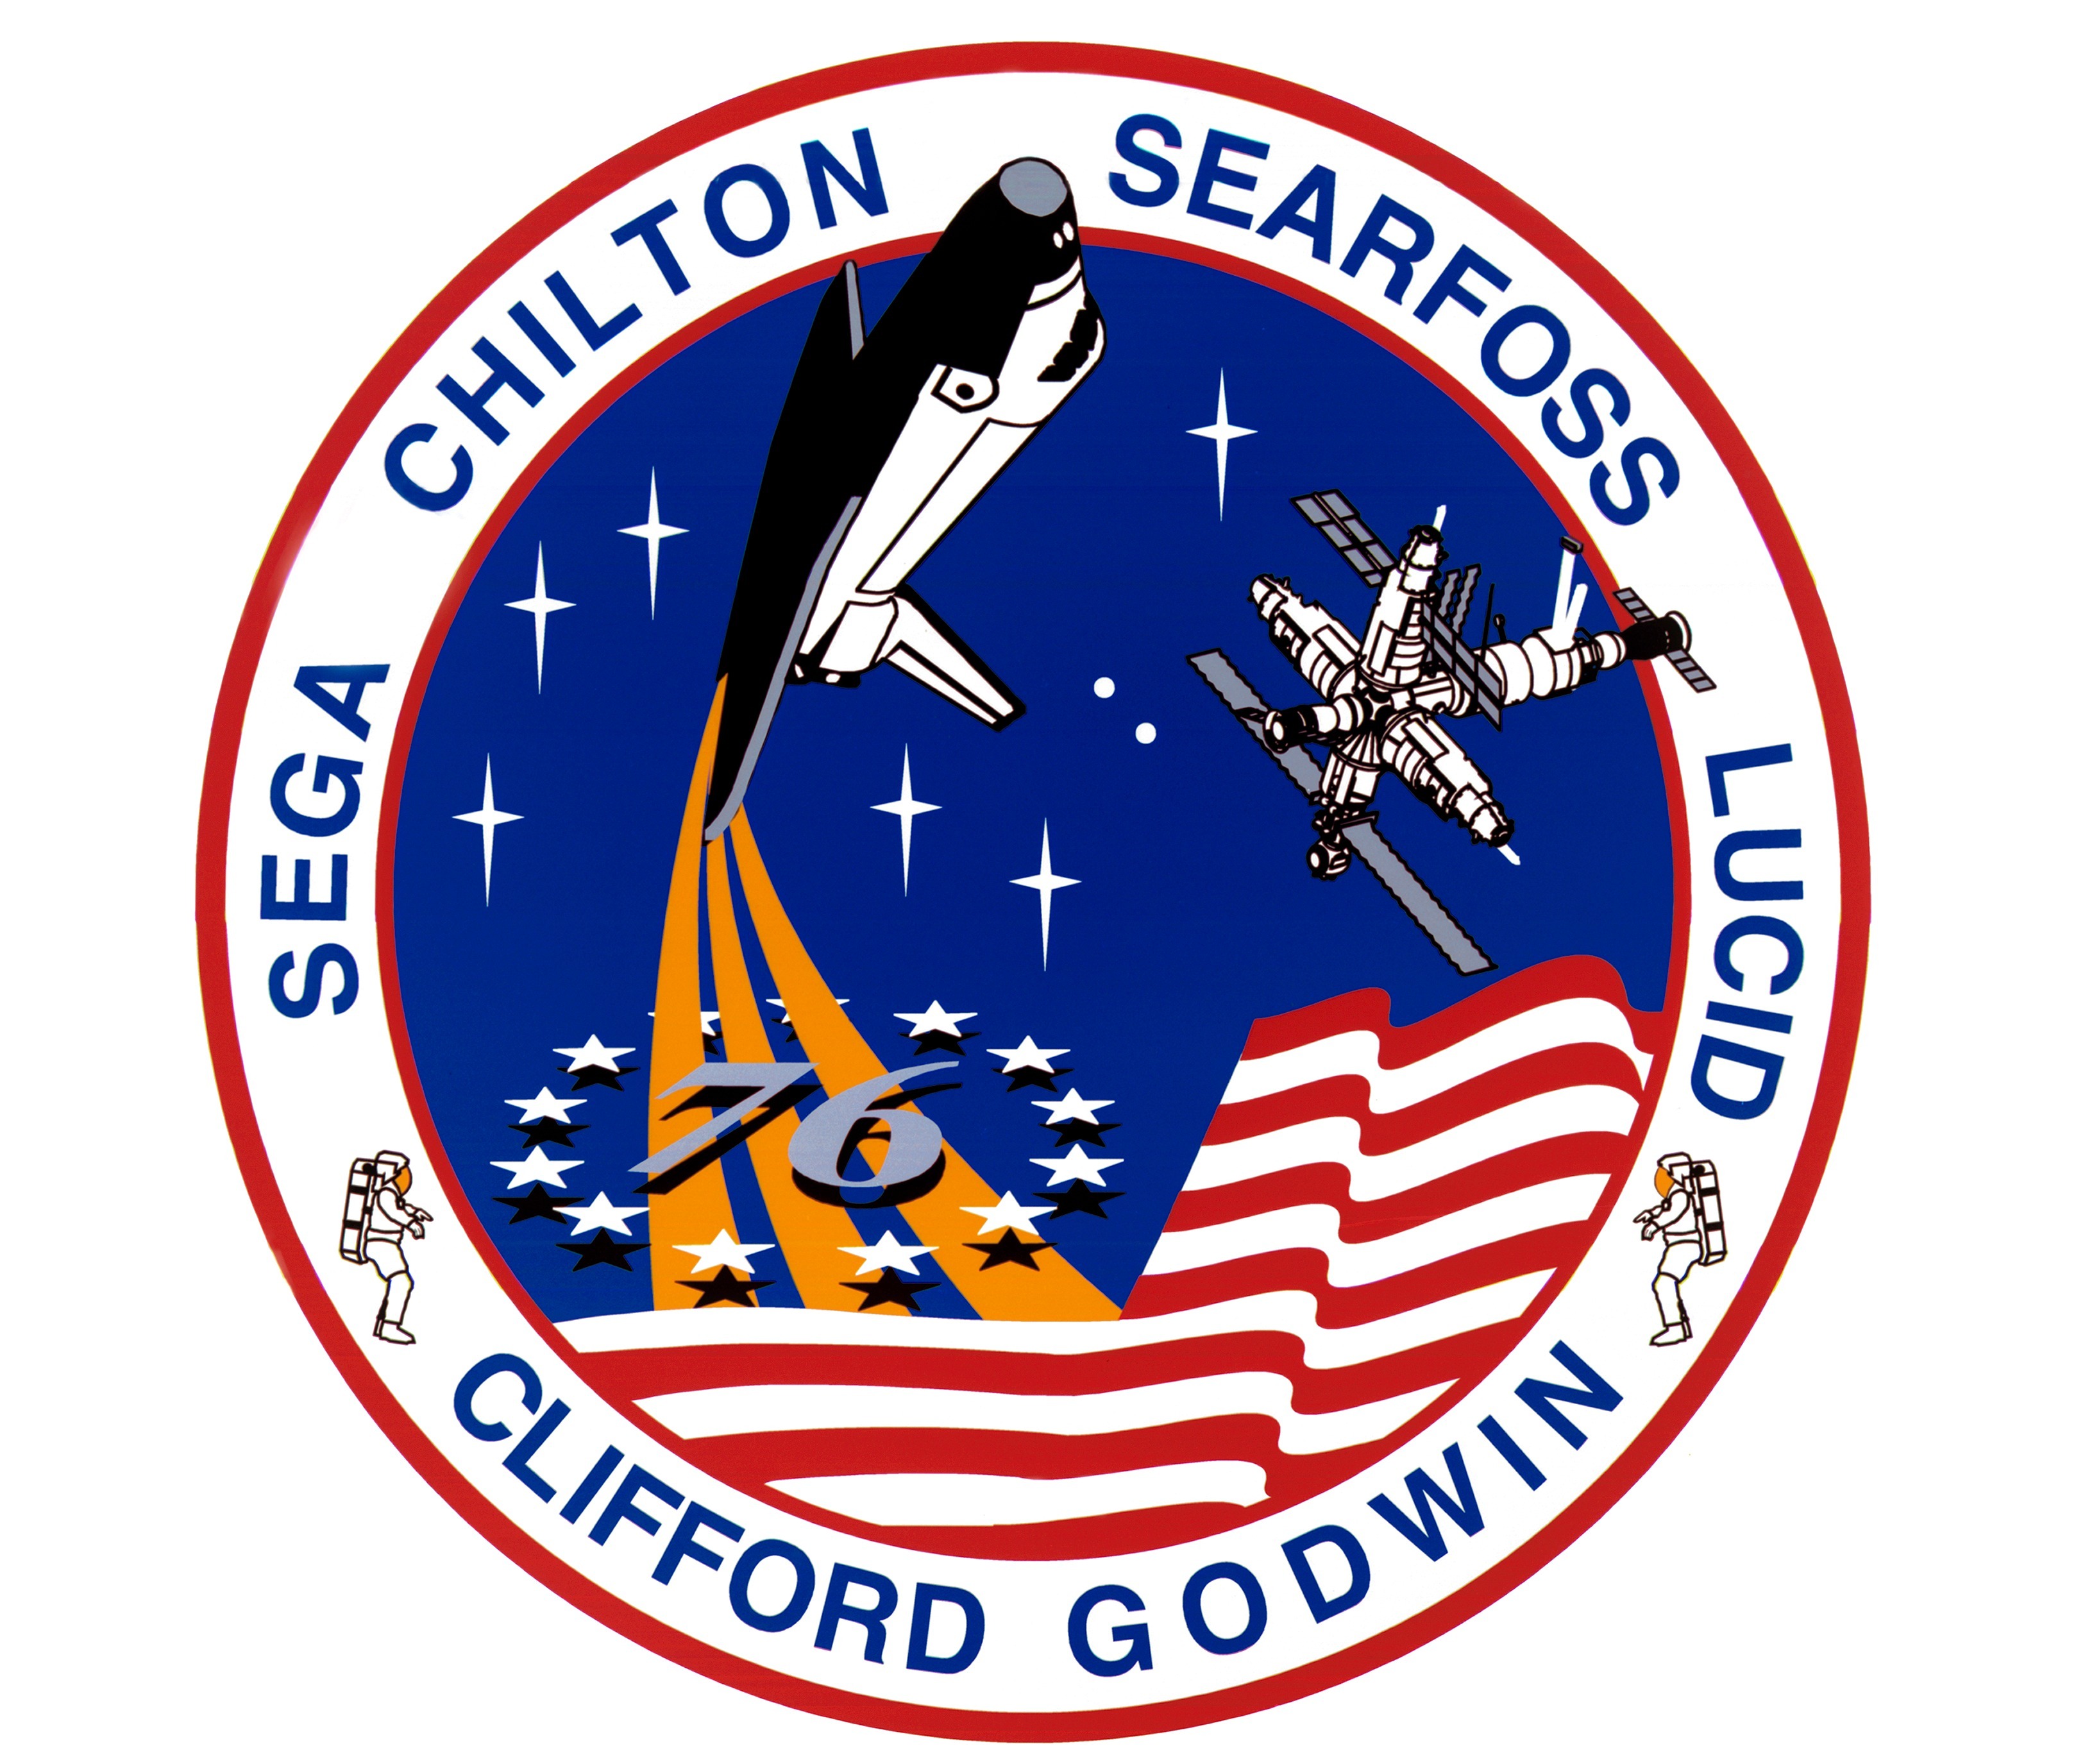 The STS-76 crew patch depicts the space shuttle Atlantis and Russia's Mir Space Station as the spacecraft prepare for a rendezvous and docking.